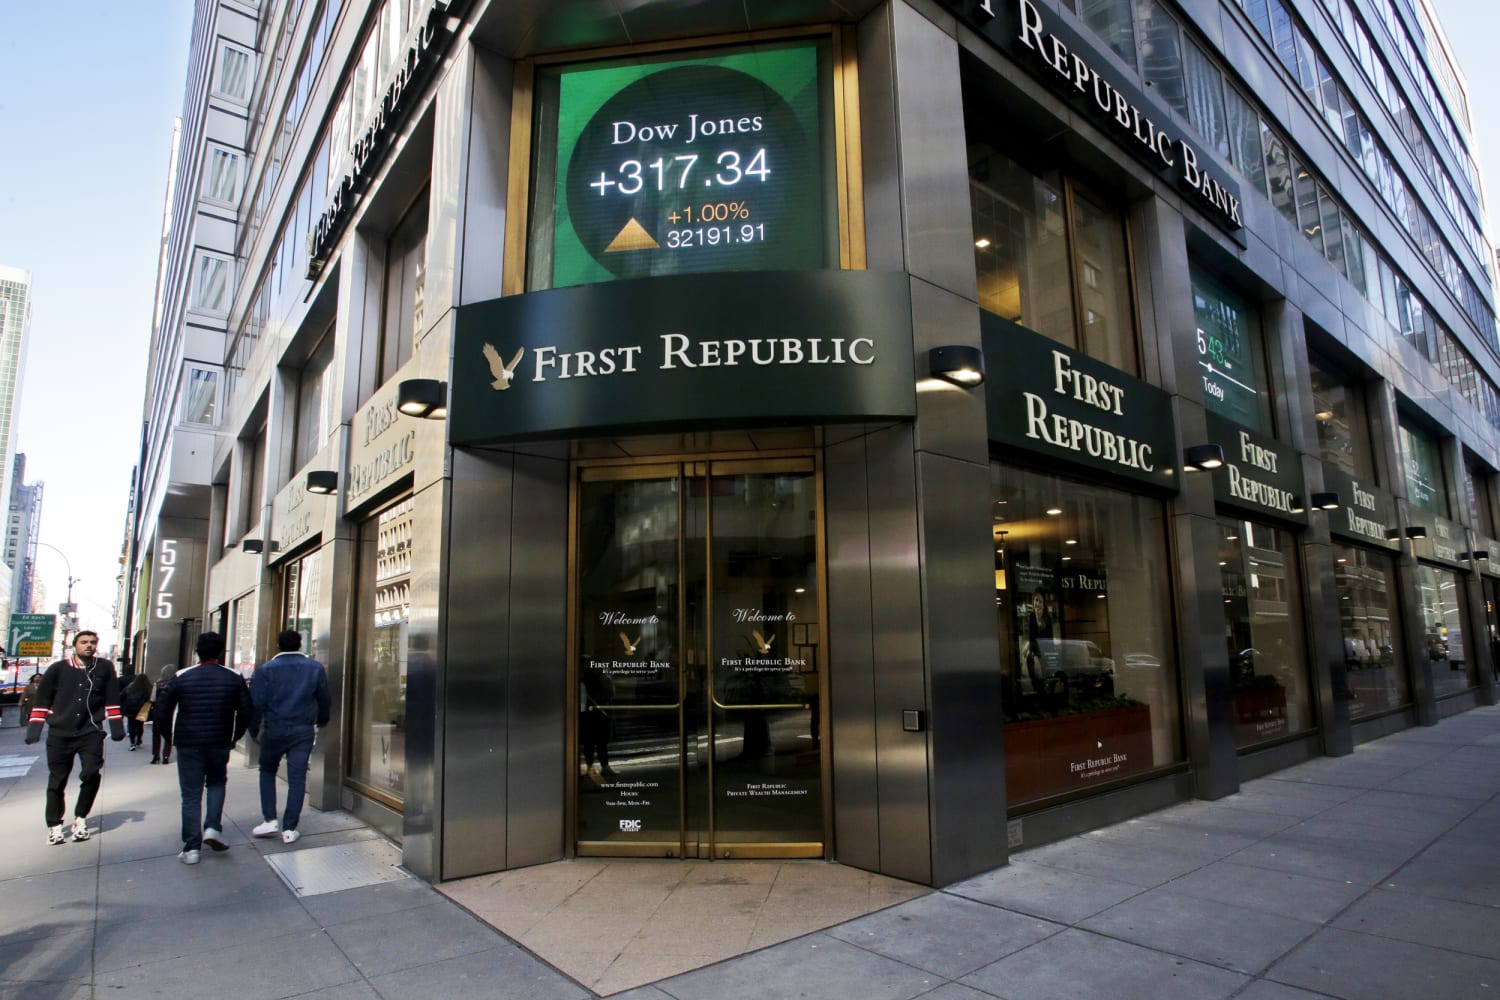 Wall Street rides to the rescue as 11 banks pledge $30 billion to First Republic Bank